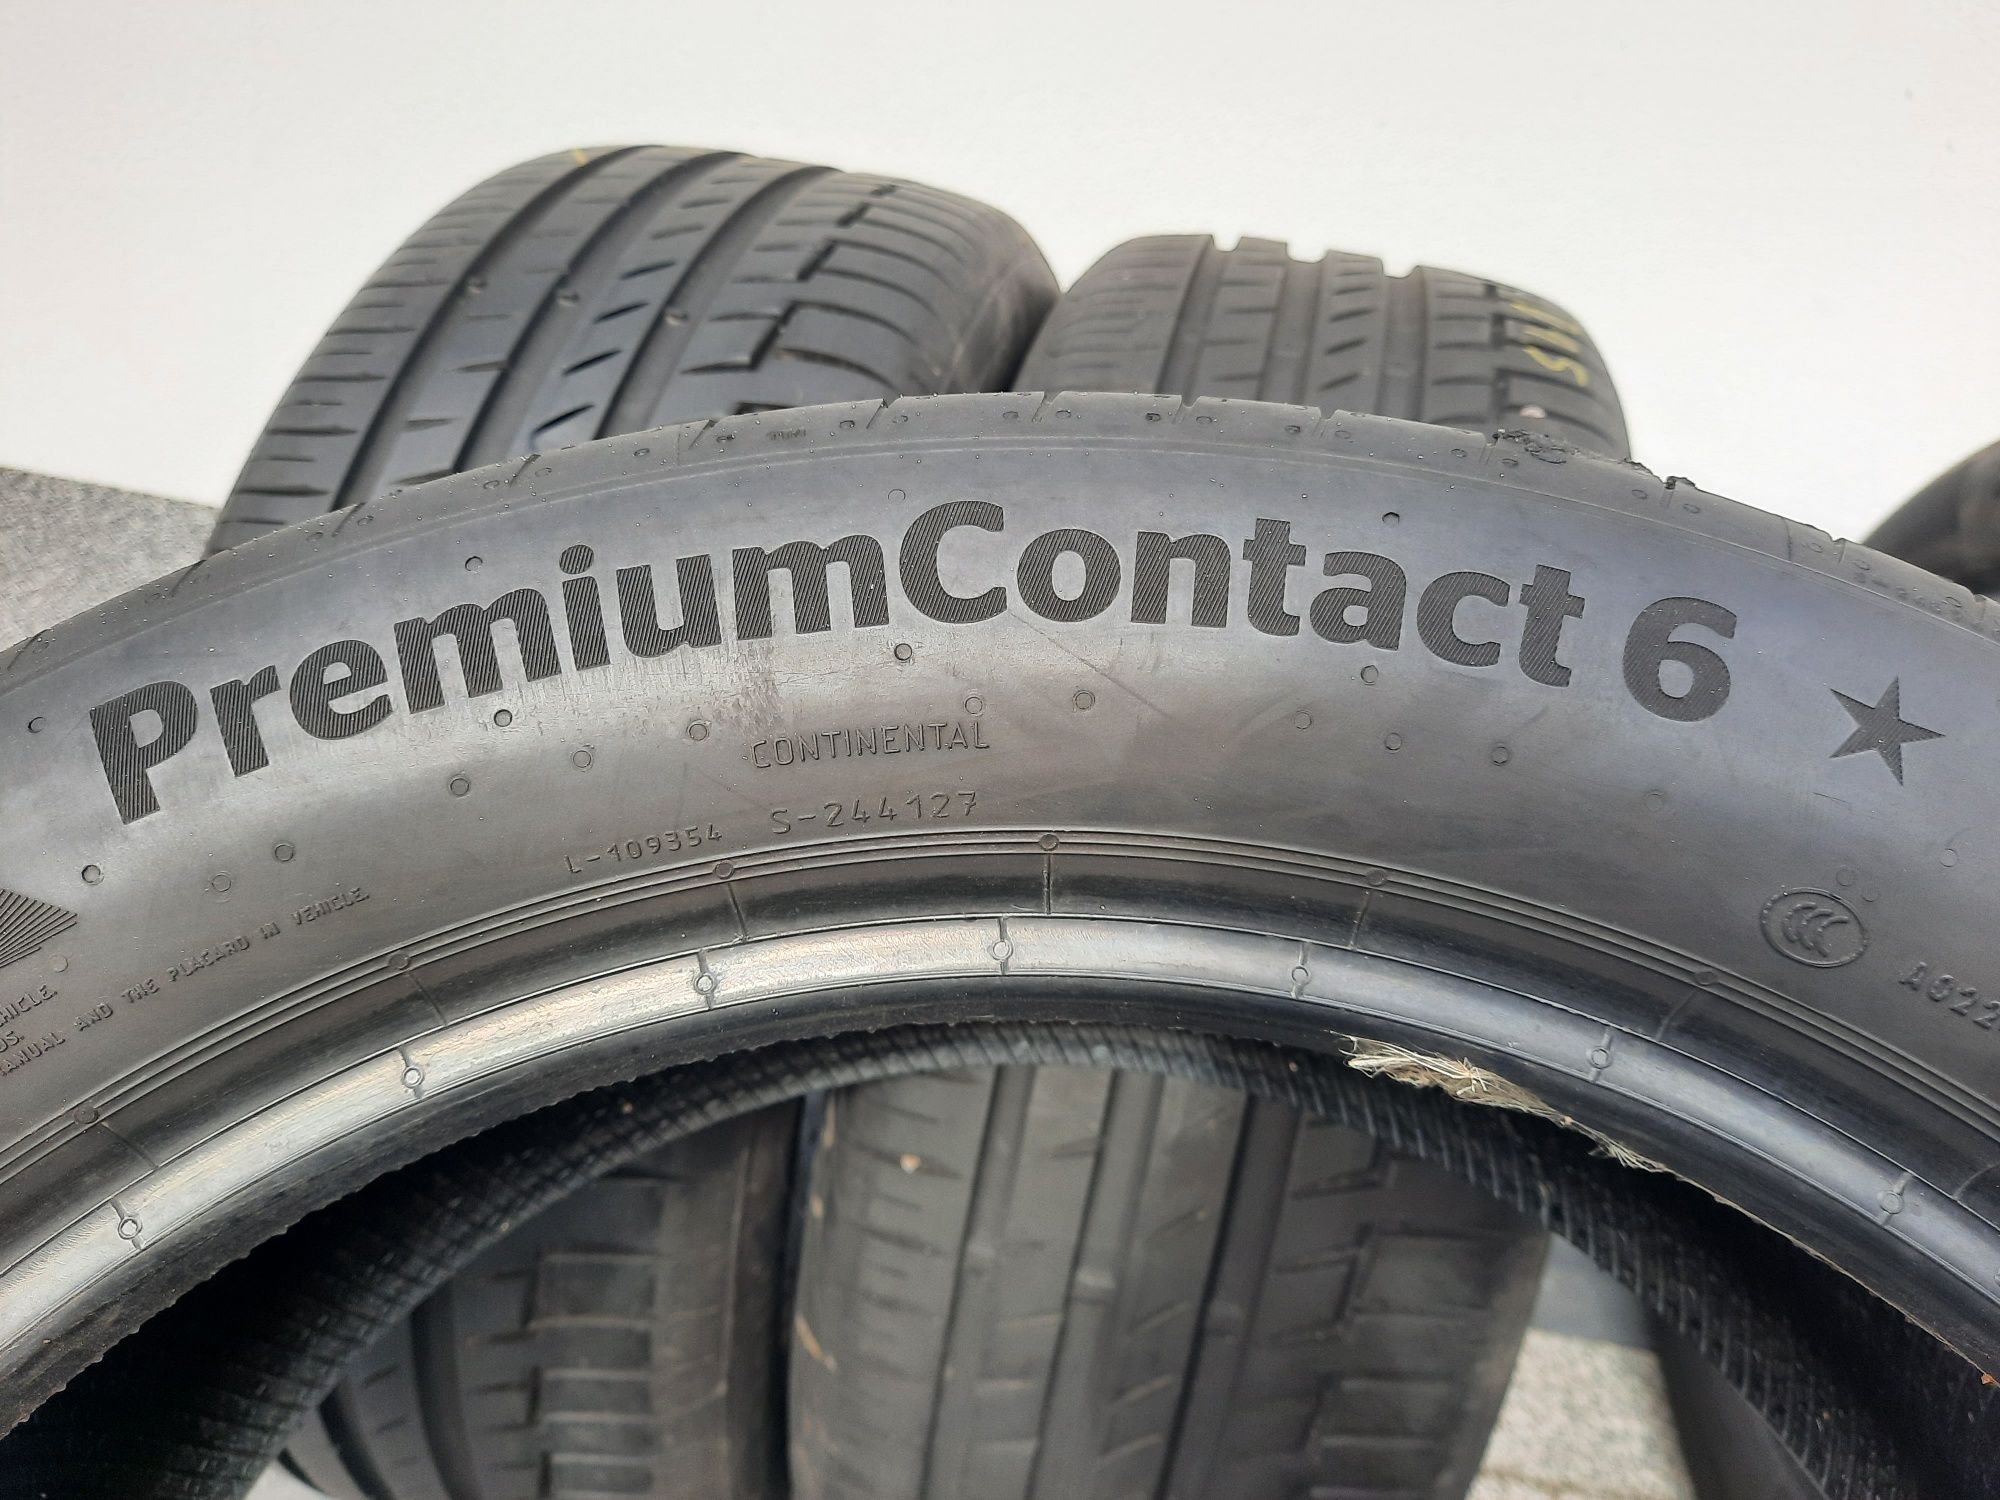 4 opony 225/50 R18 Continental PremiumContact 6 7mm 2020r